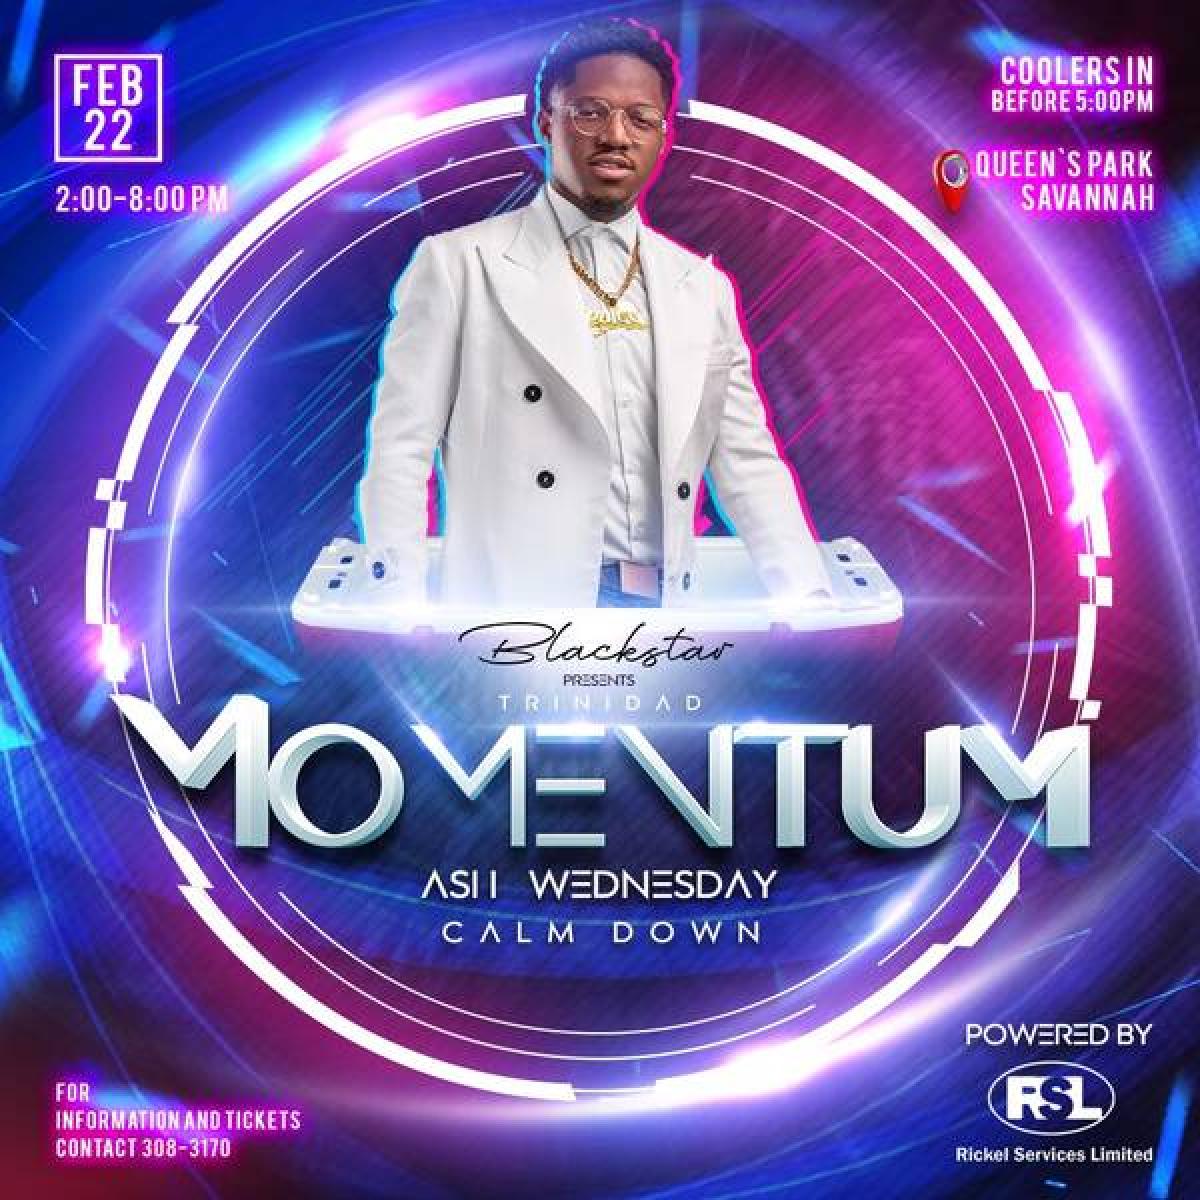 Momentum Ash Wed Calm Down  flyer or graphic.